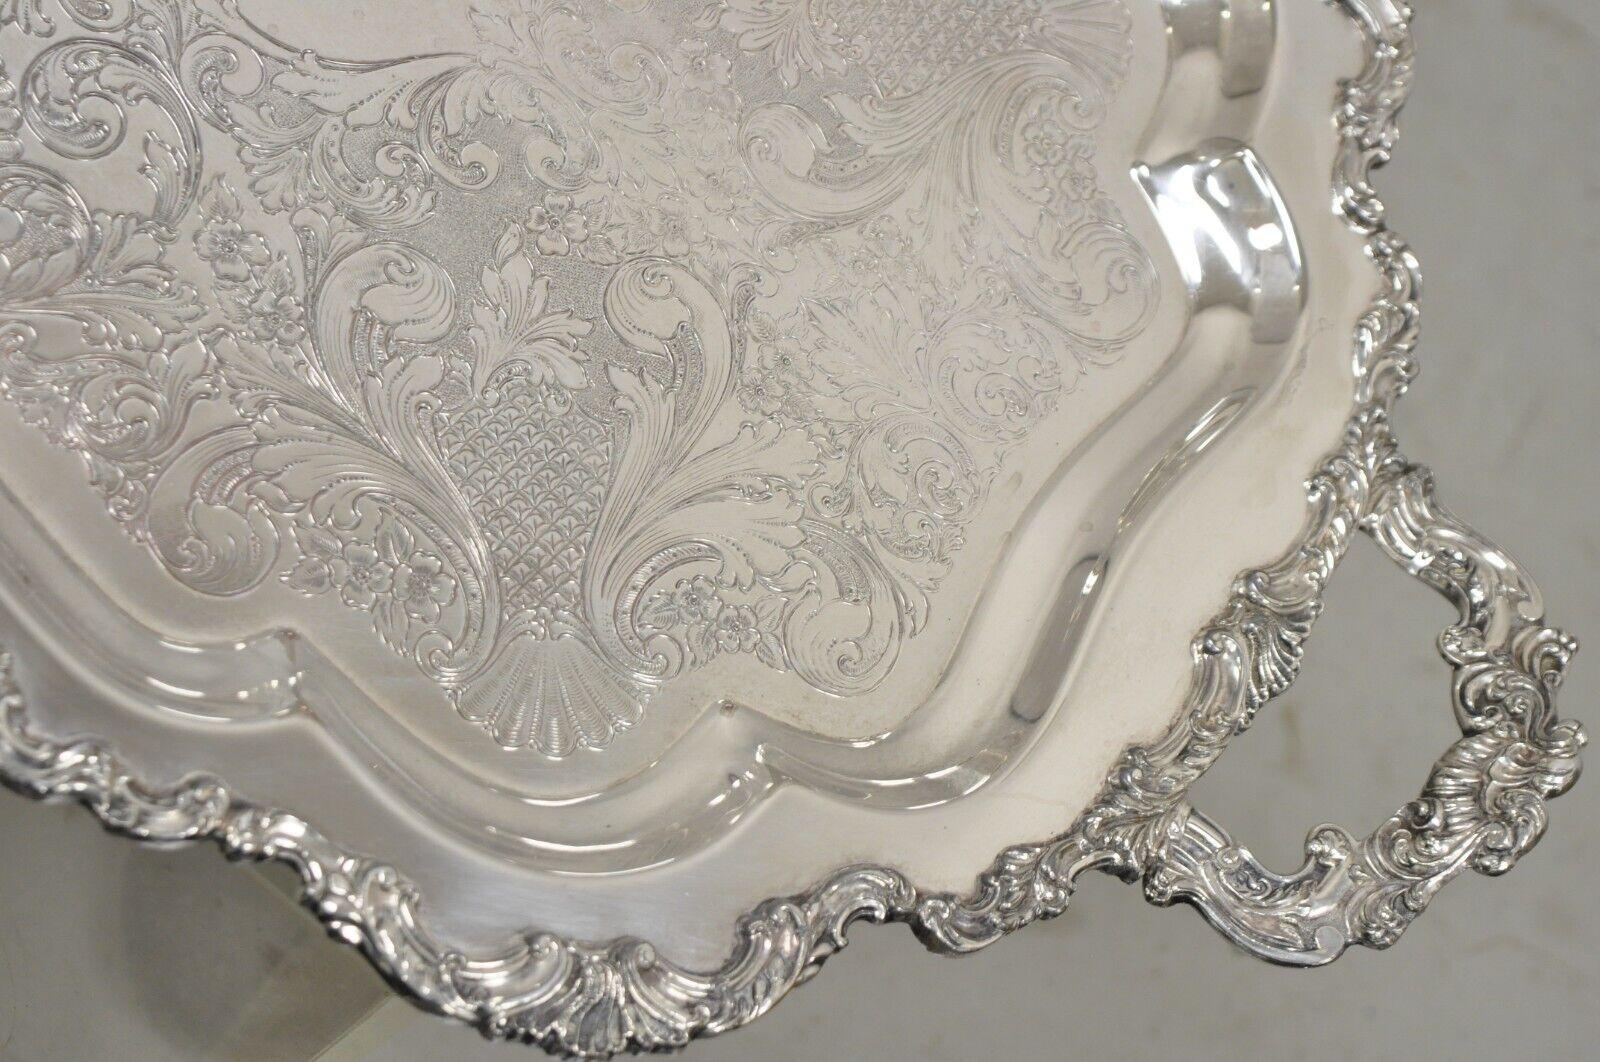 Community Ascot 0316-10 Silver Plated Ornate Twin Handle Serving Platter Tray For Sale 1